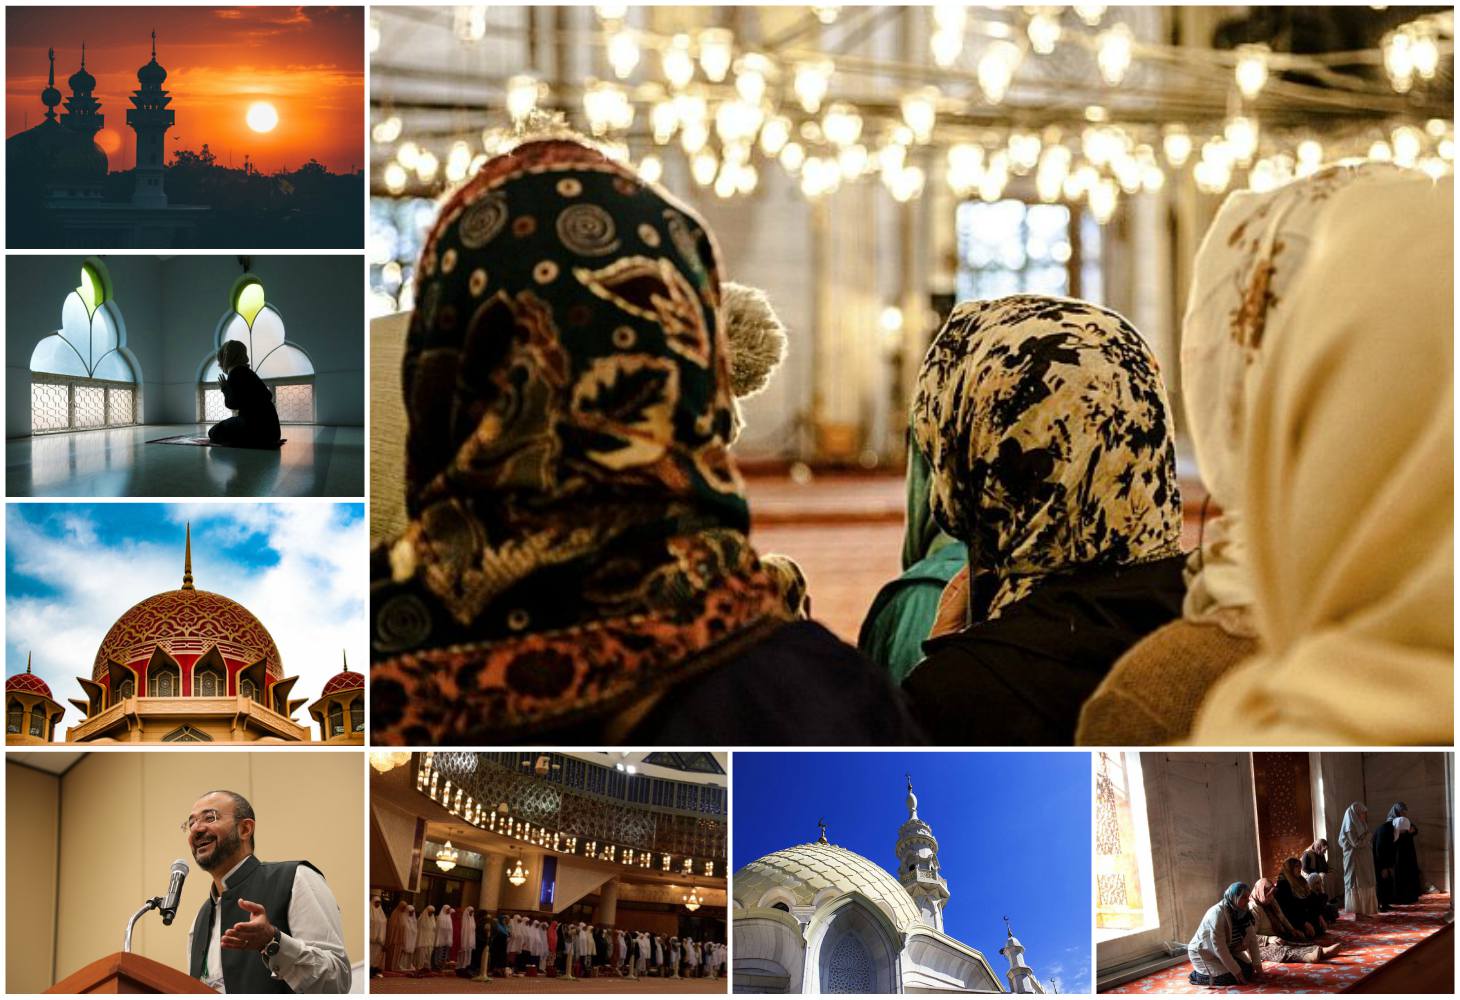 Women in Mosque: Any Special Dress Code? - About Islam